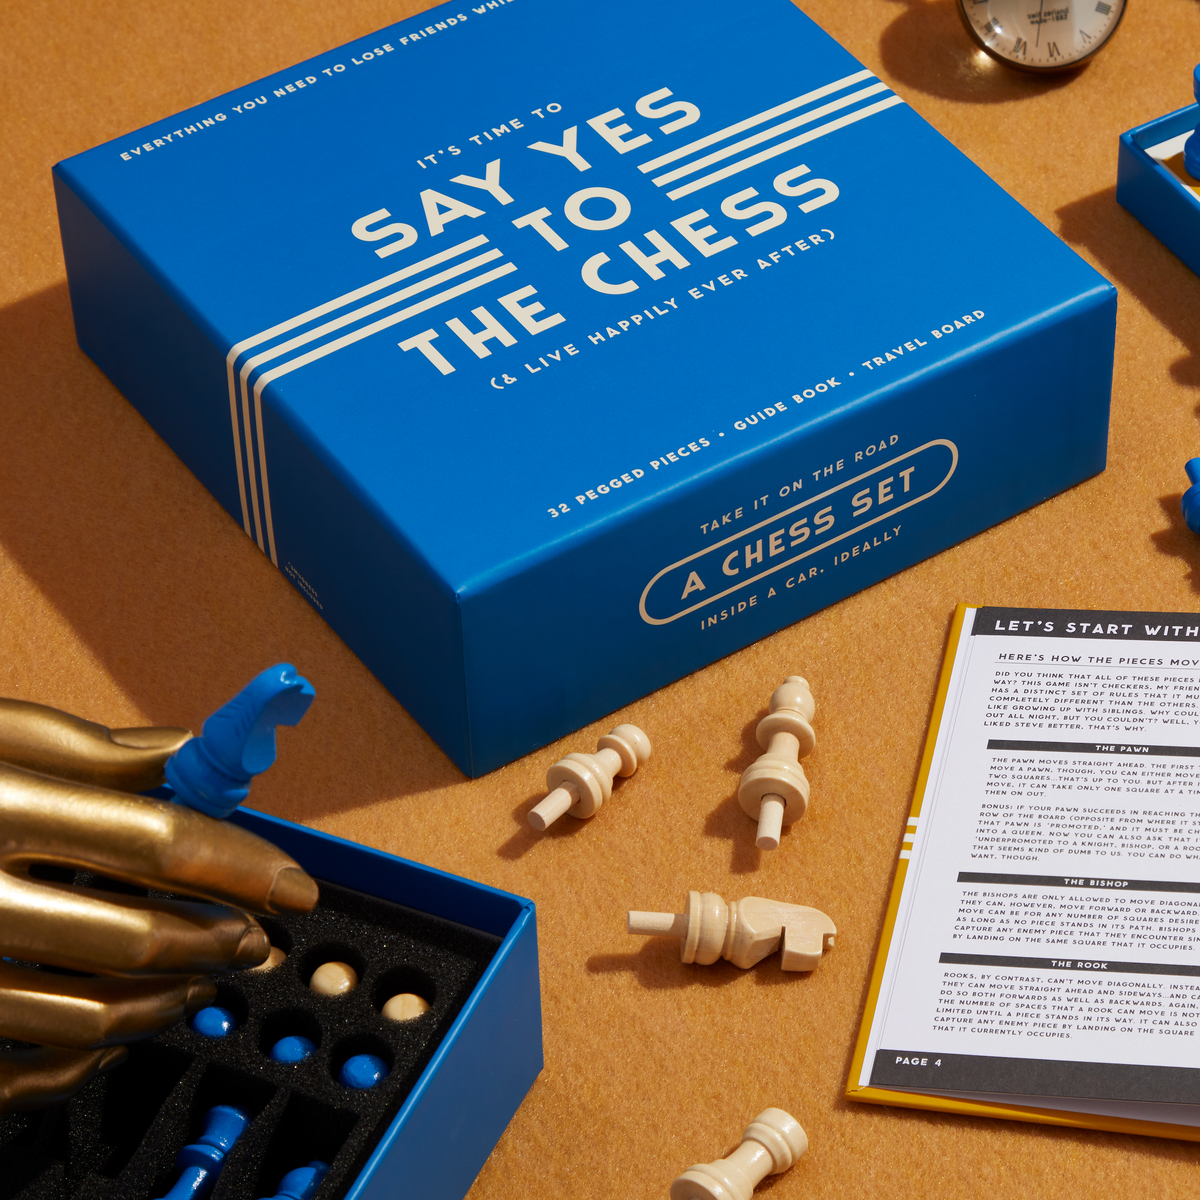 Making Chess Pieces by Hand - A Guide to How They Do It